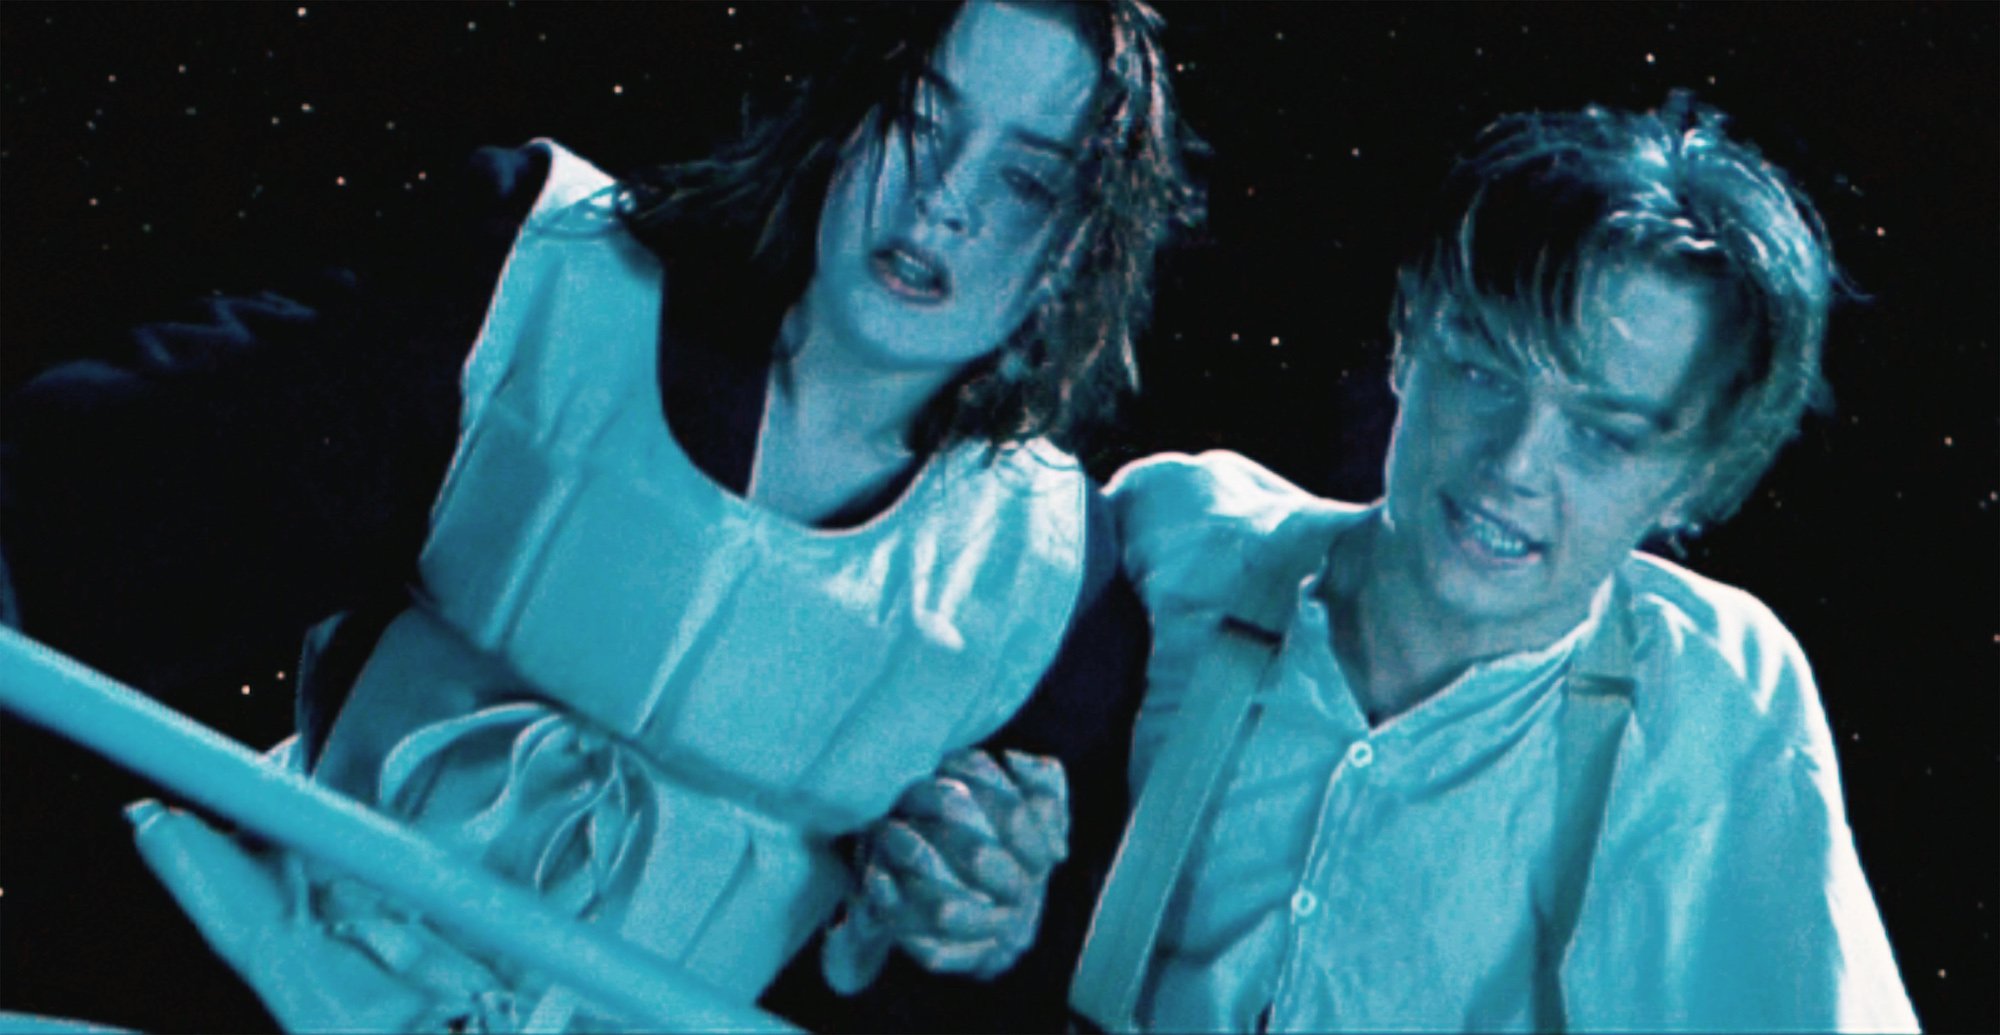 Rose (Kate Winslet) and Jack (Leonardo DiCaprio) on the Titanic, as the ship plunges into the water below.